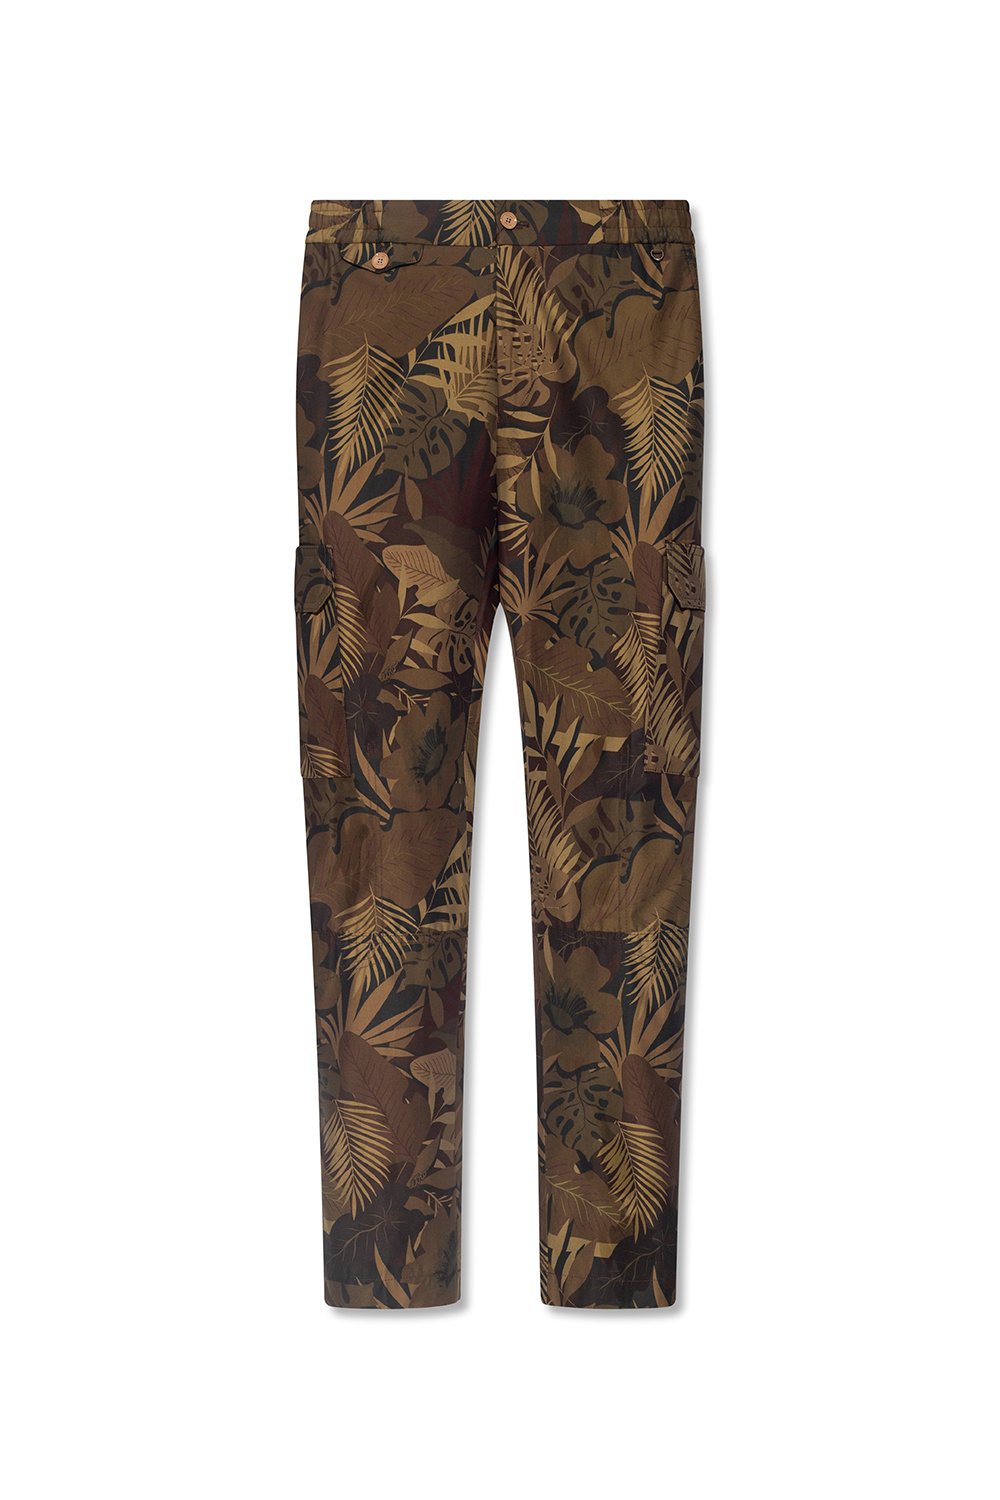 Etro Patterned cargo trousers